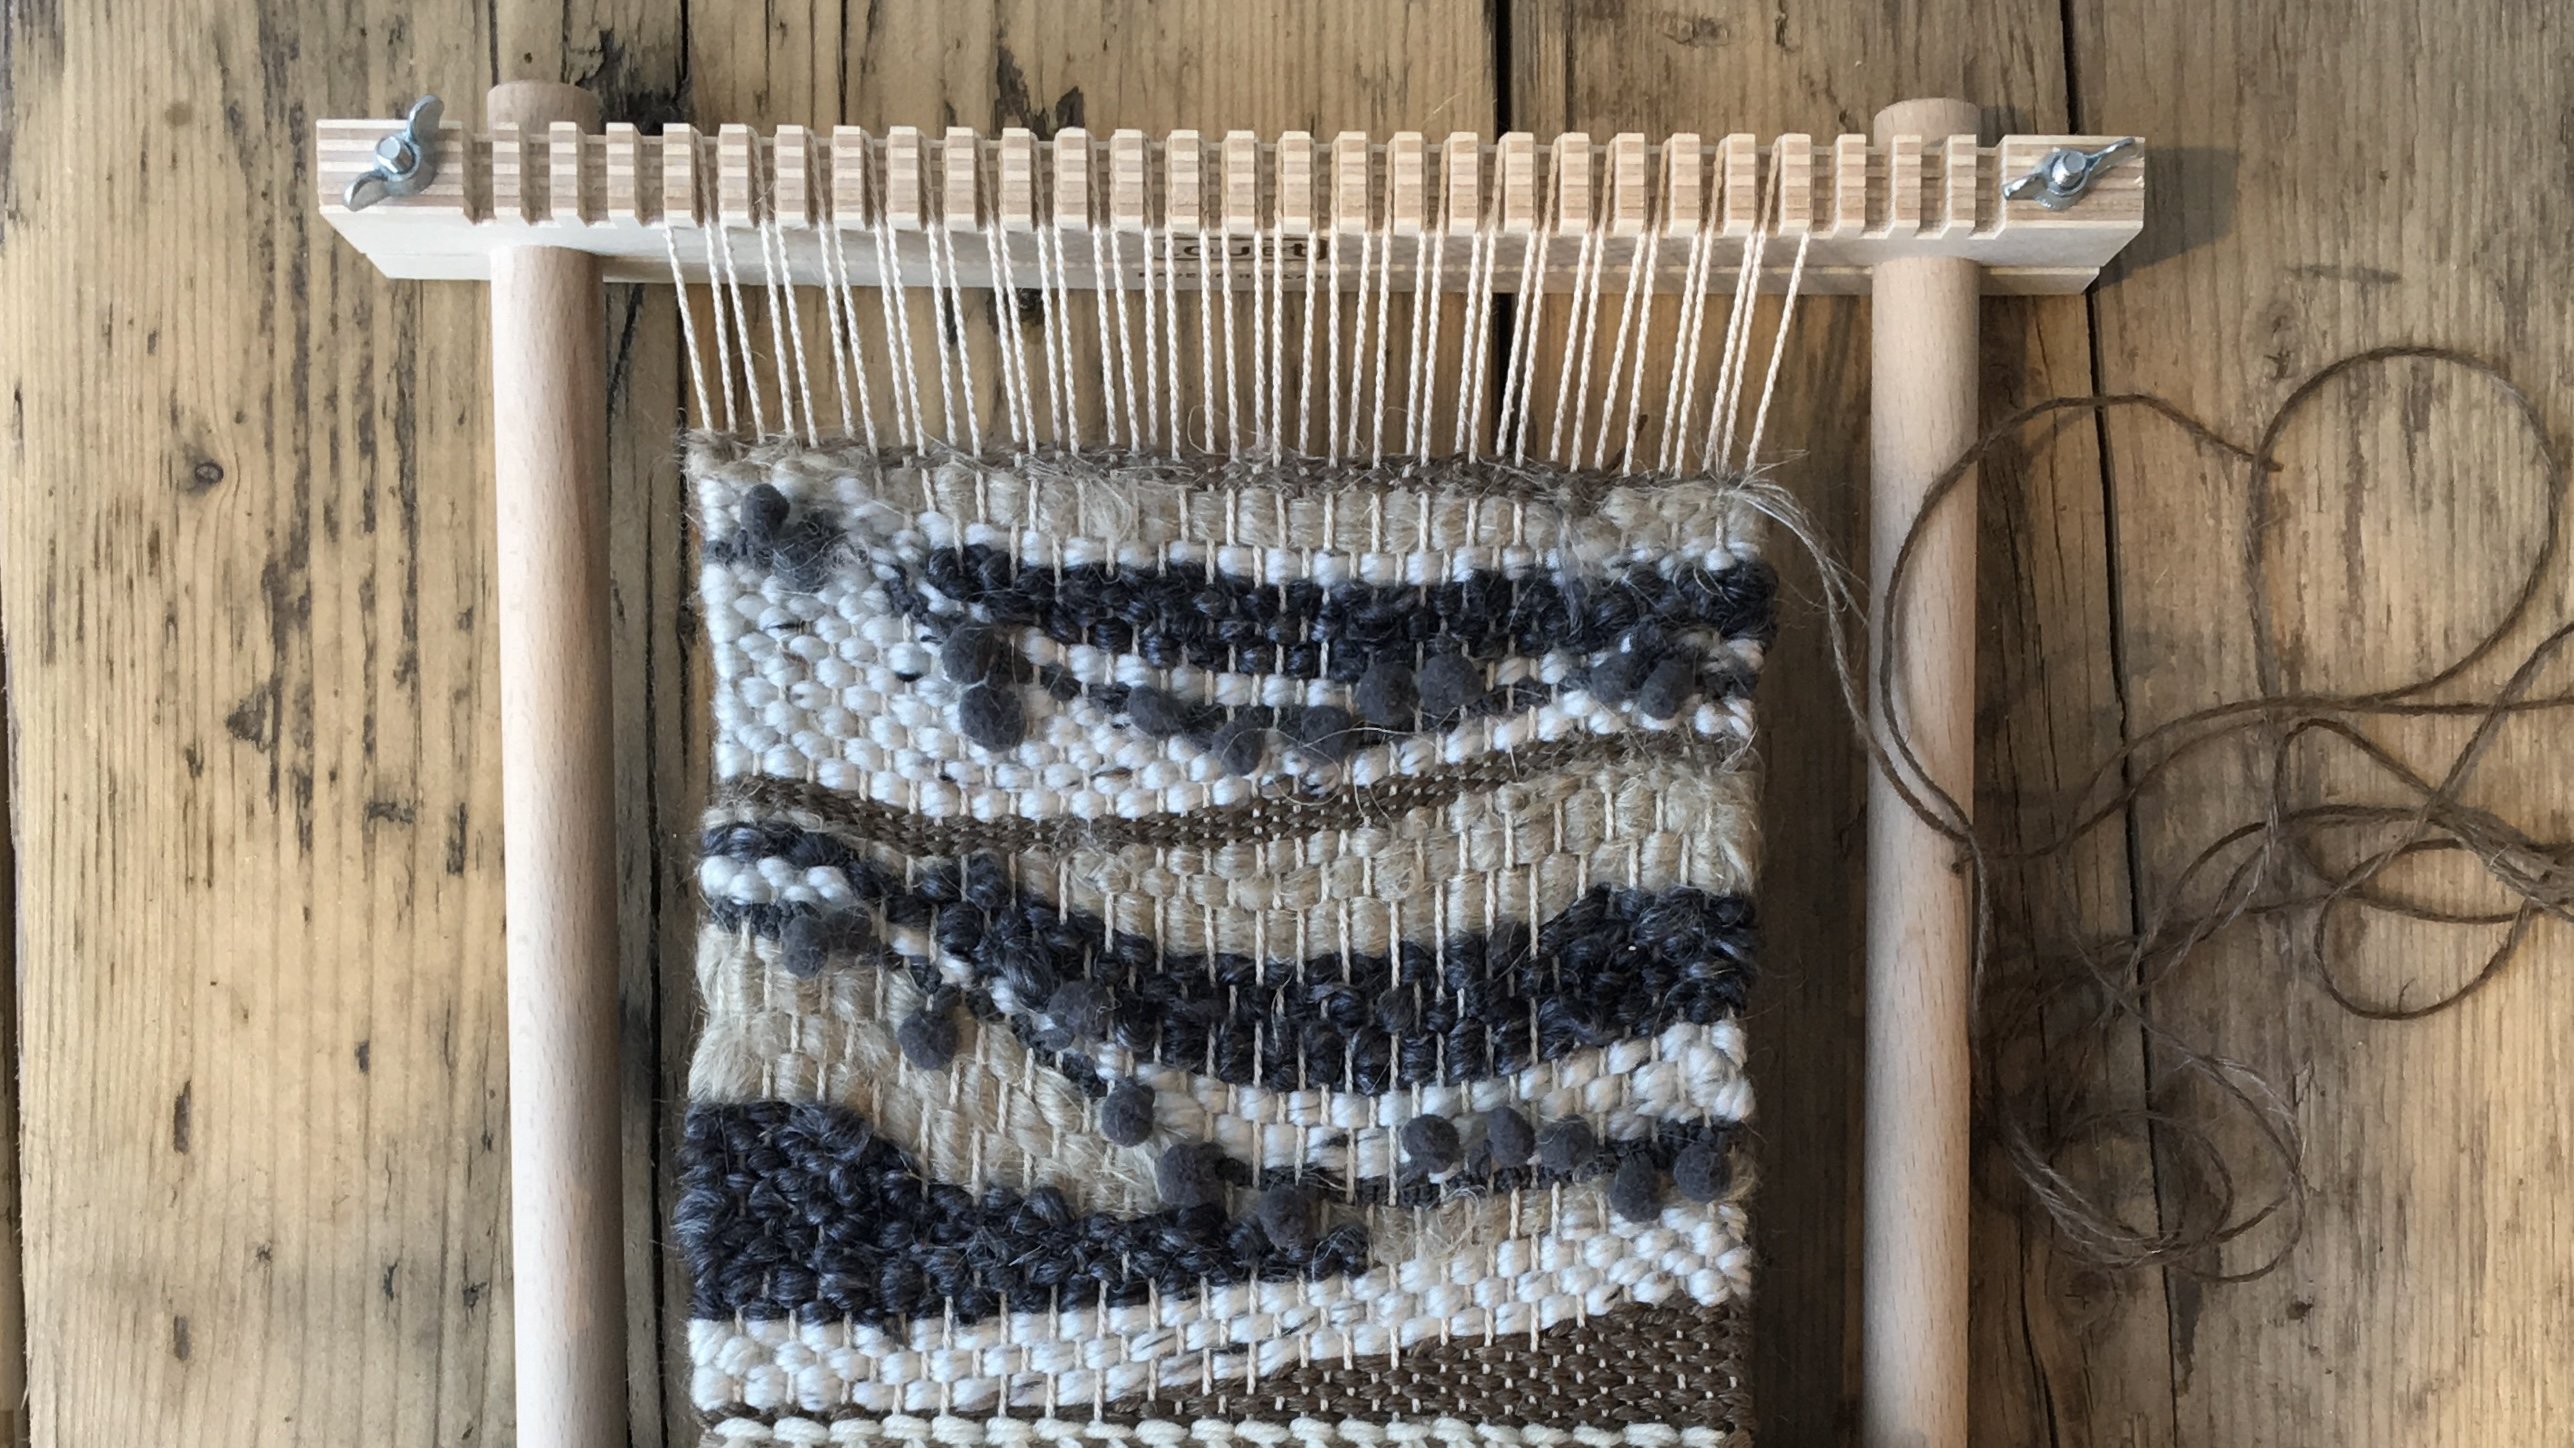 Six Hour Introduction to Frame Loom Weaving